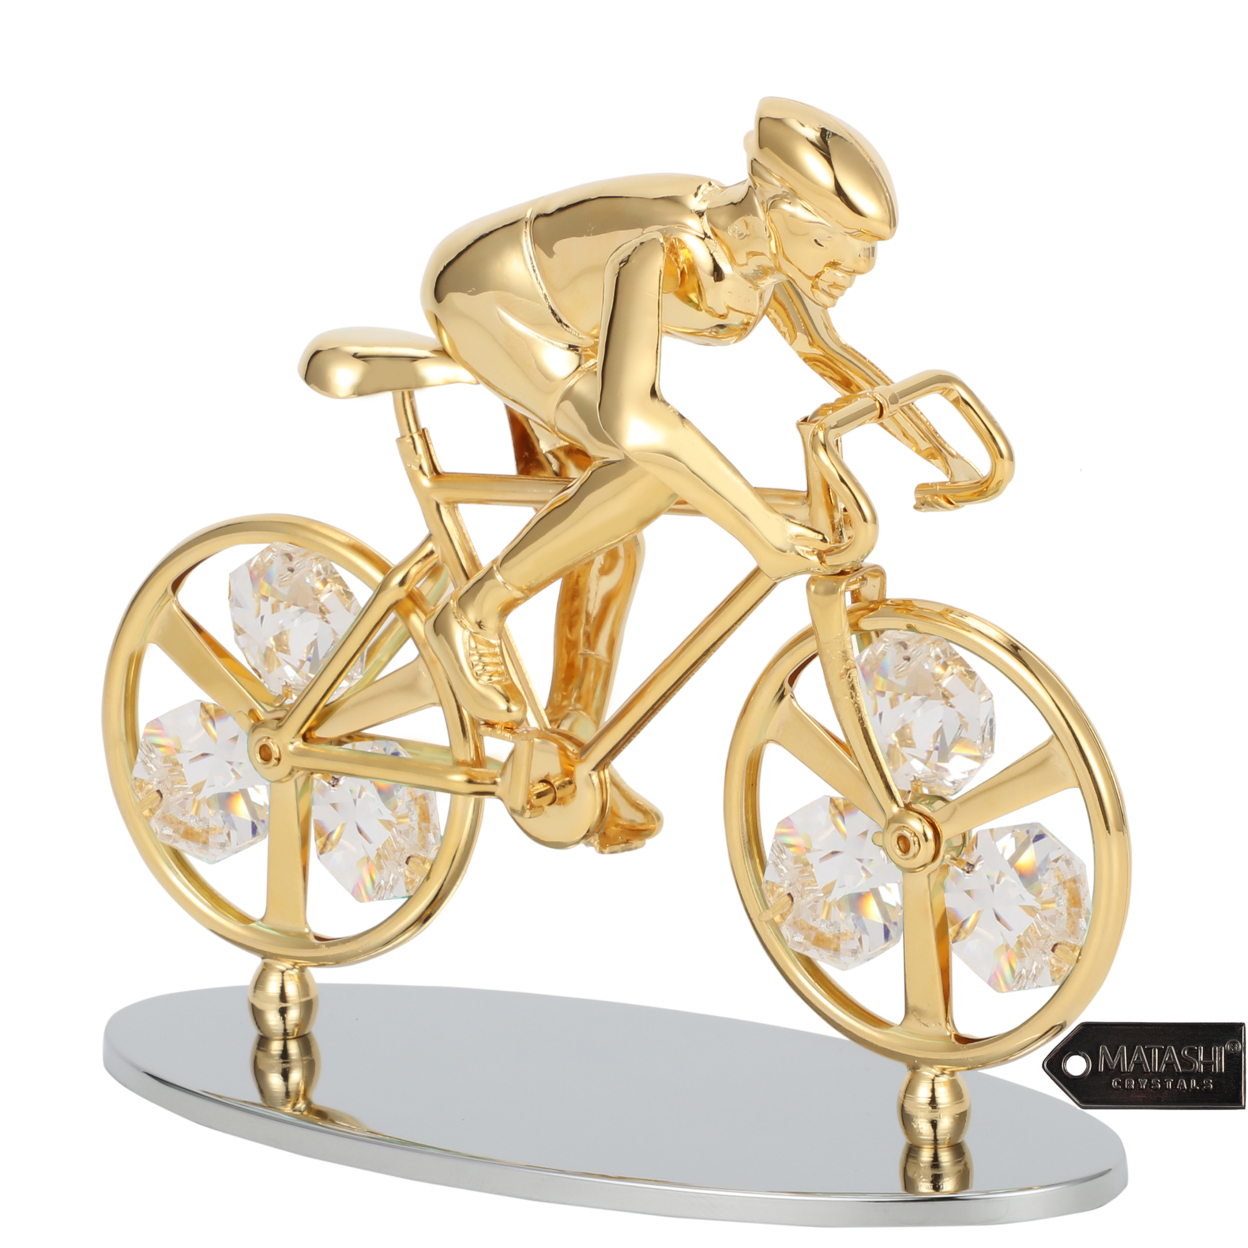 Matashi 24K Gold Plated Cyclist On A Bicycle Figurine W/ Crystals, Tabletop Cyclist Ornament Gift For Sports Fan Desk Accessories Trophy